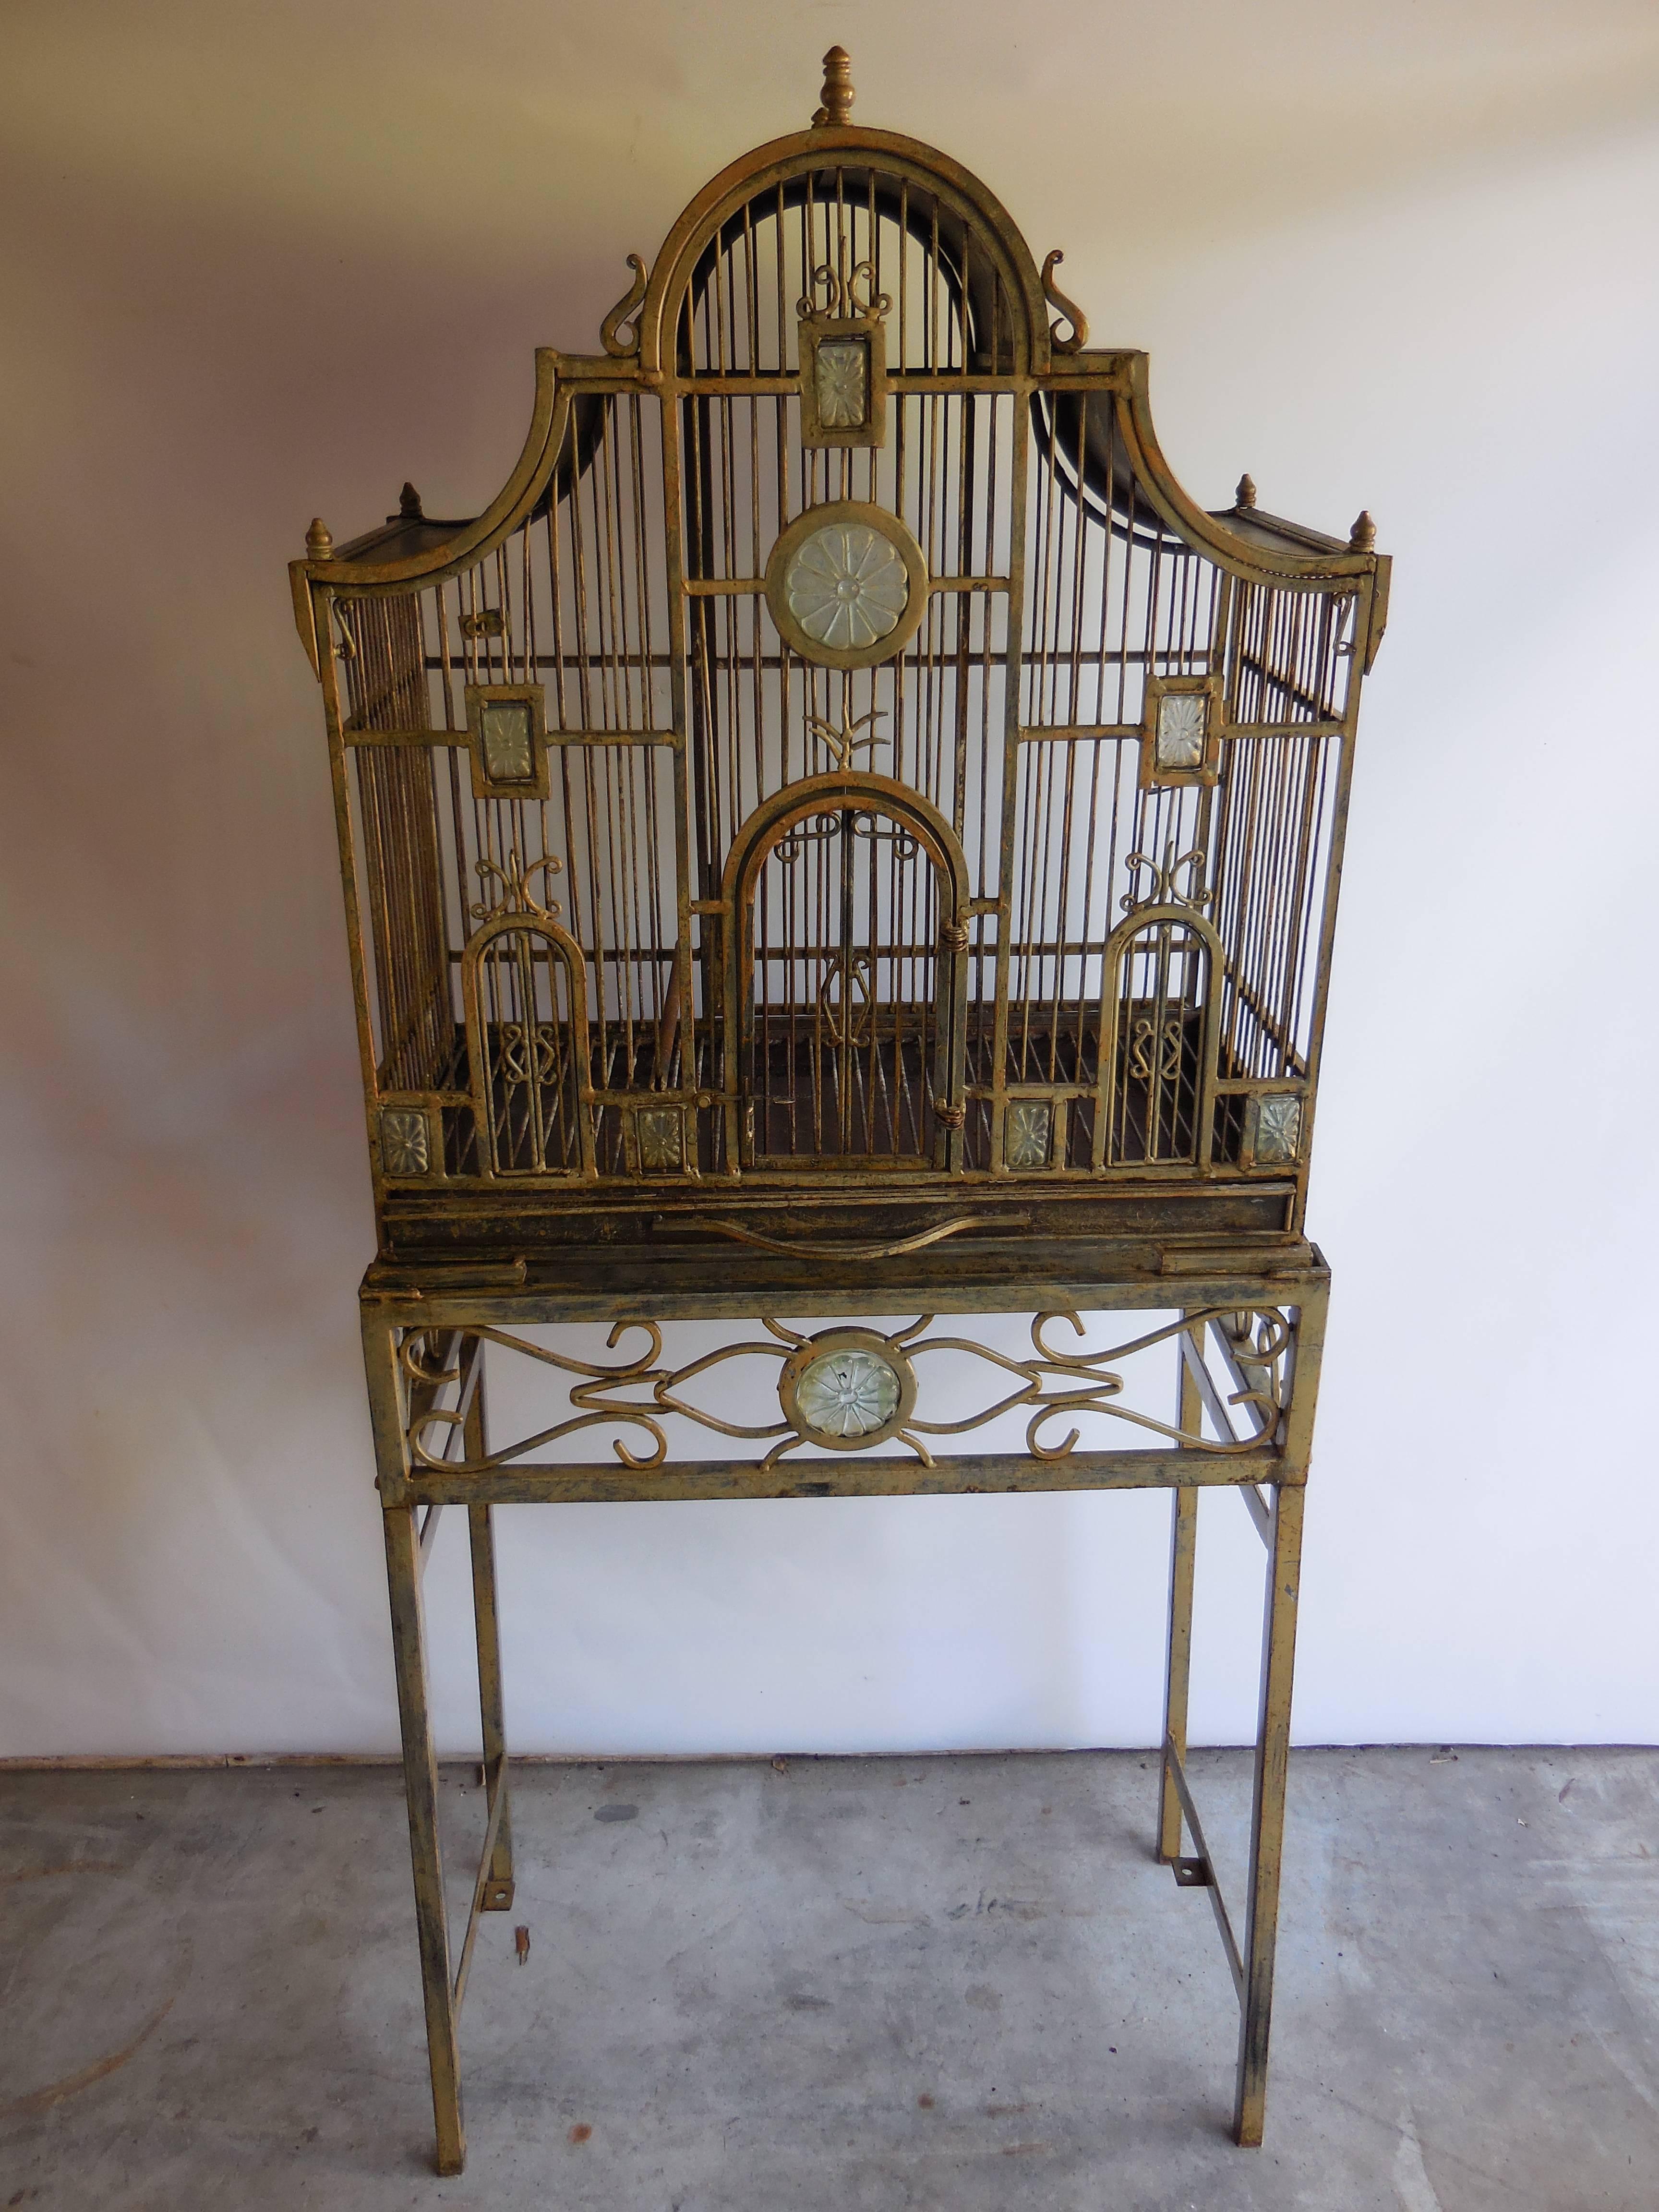 English birdcage with glass details, circa 1920. In great condition.